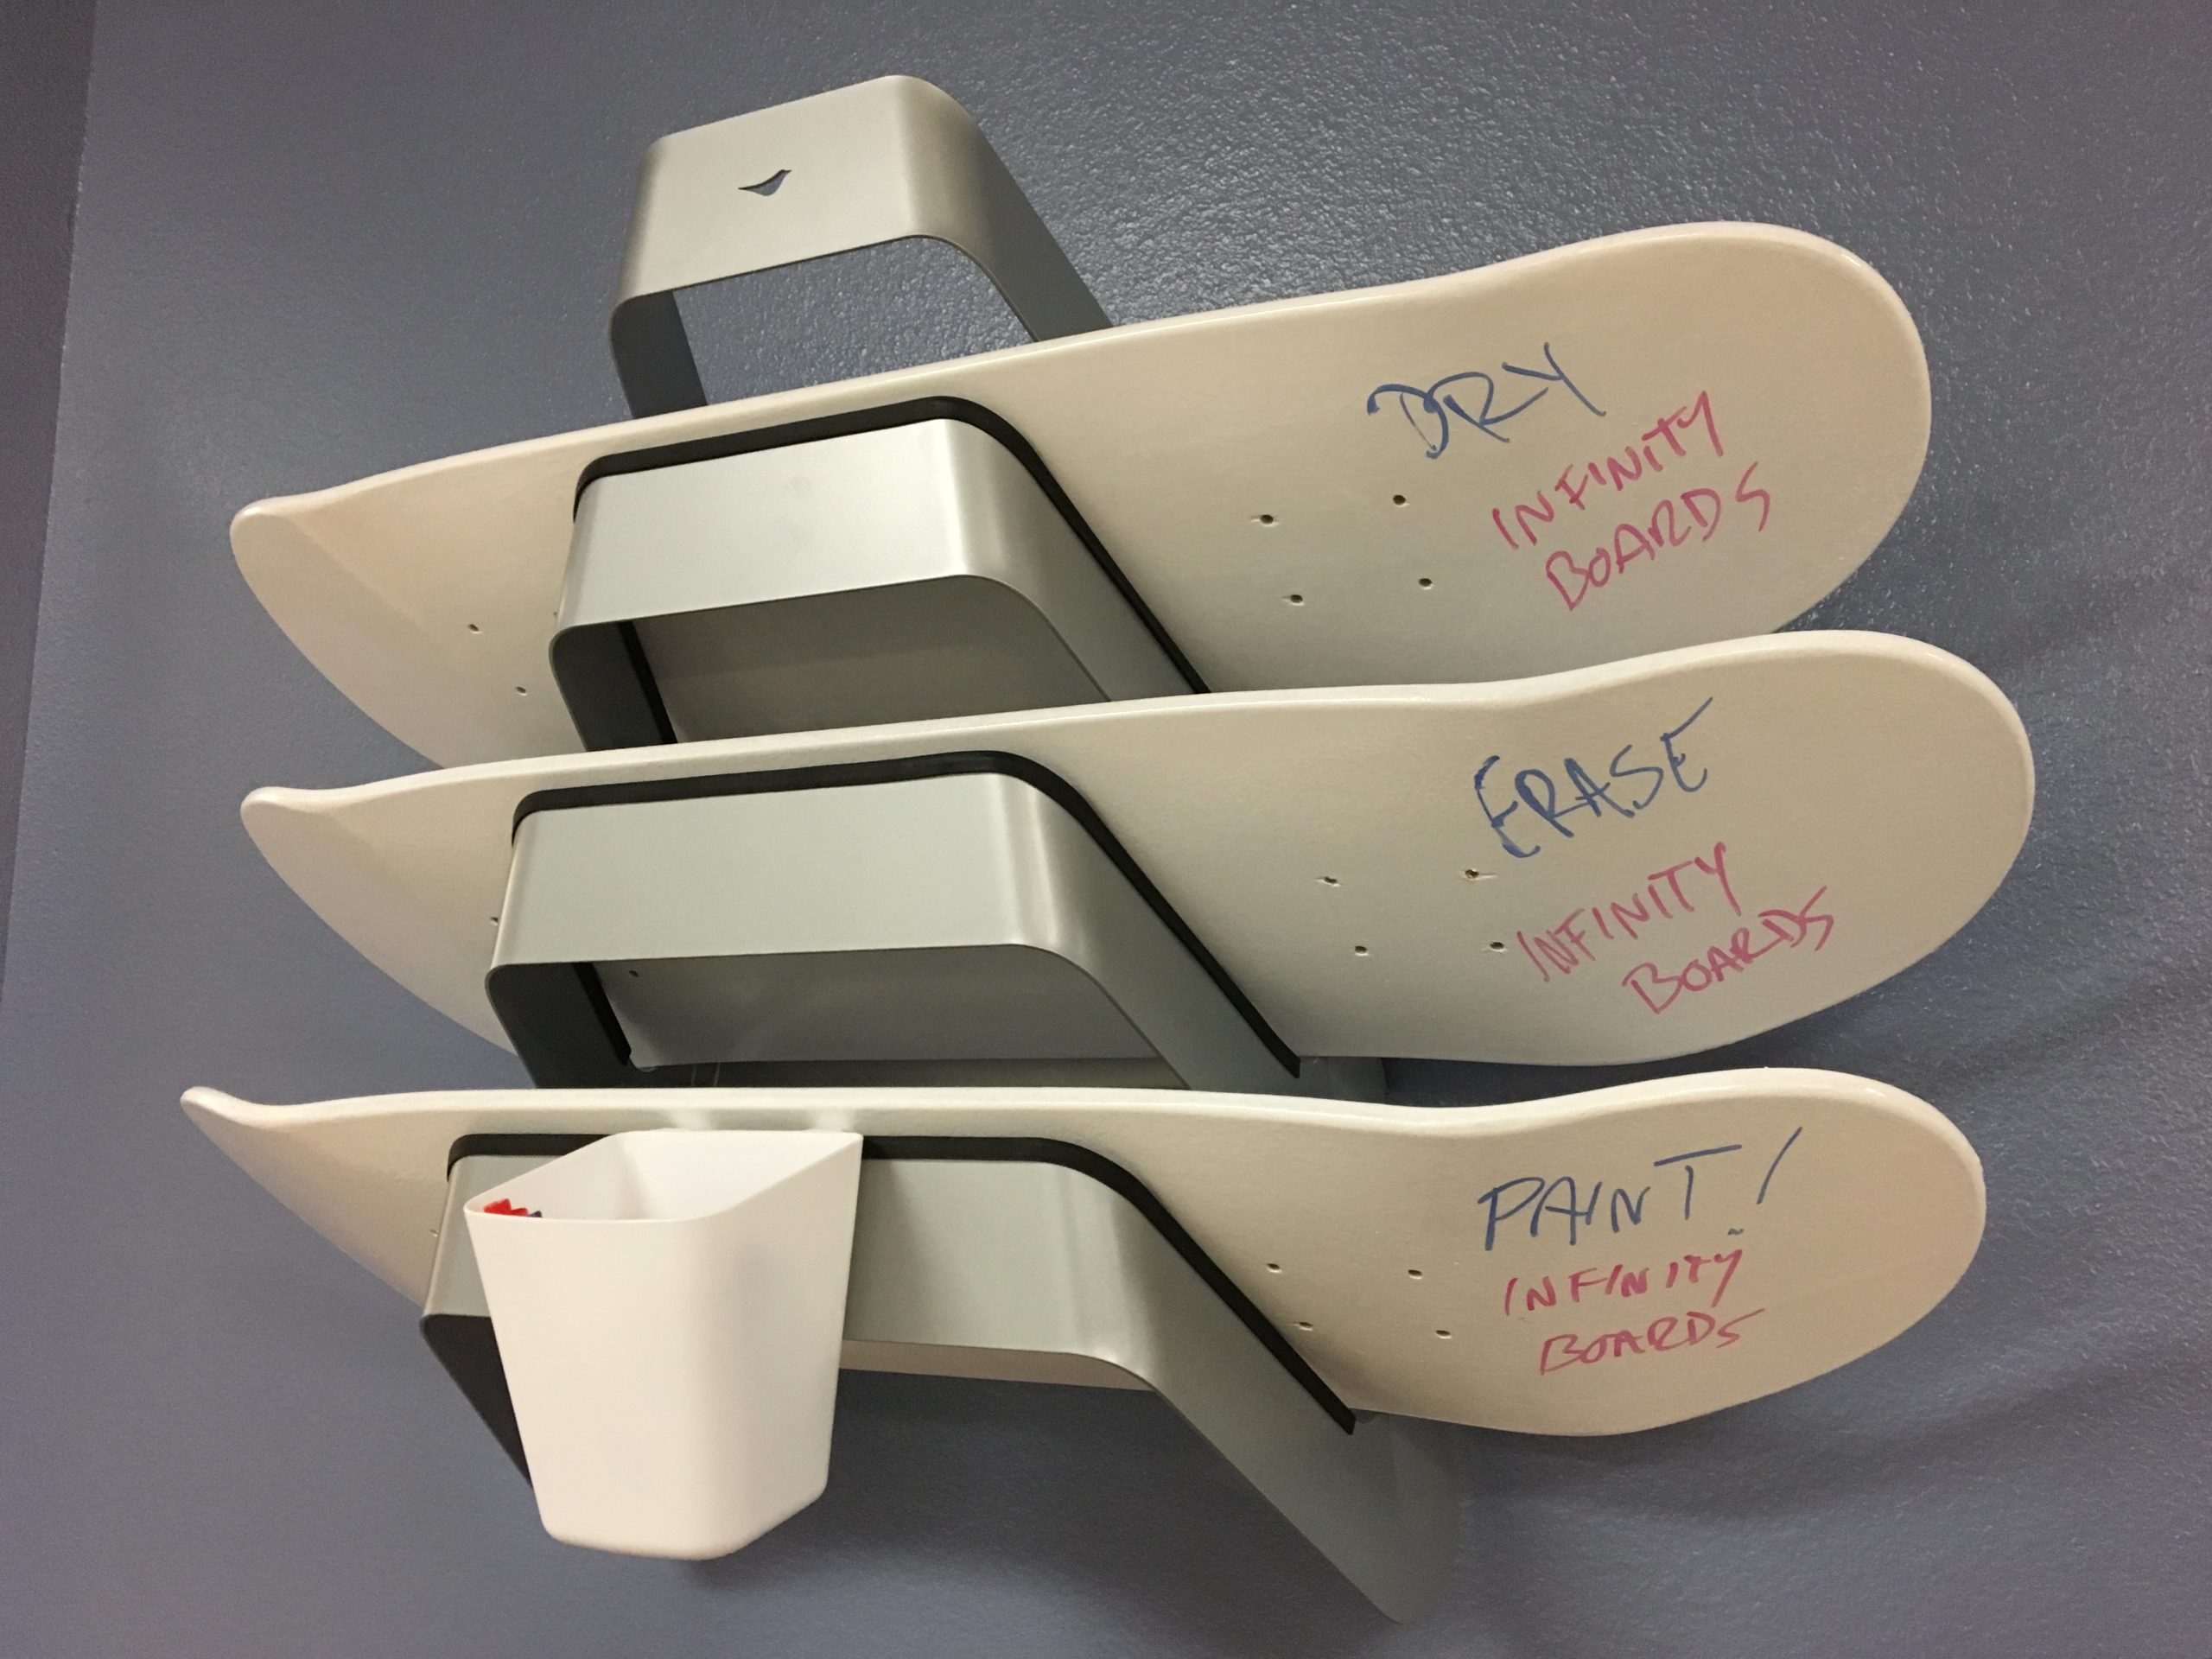 In Flagler Schools, old skateboards, surfboards and cubes are wrapped in glossy spray paint and students can grab them as needed for whiteboard activities. 